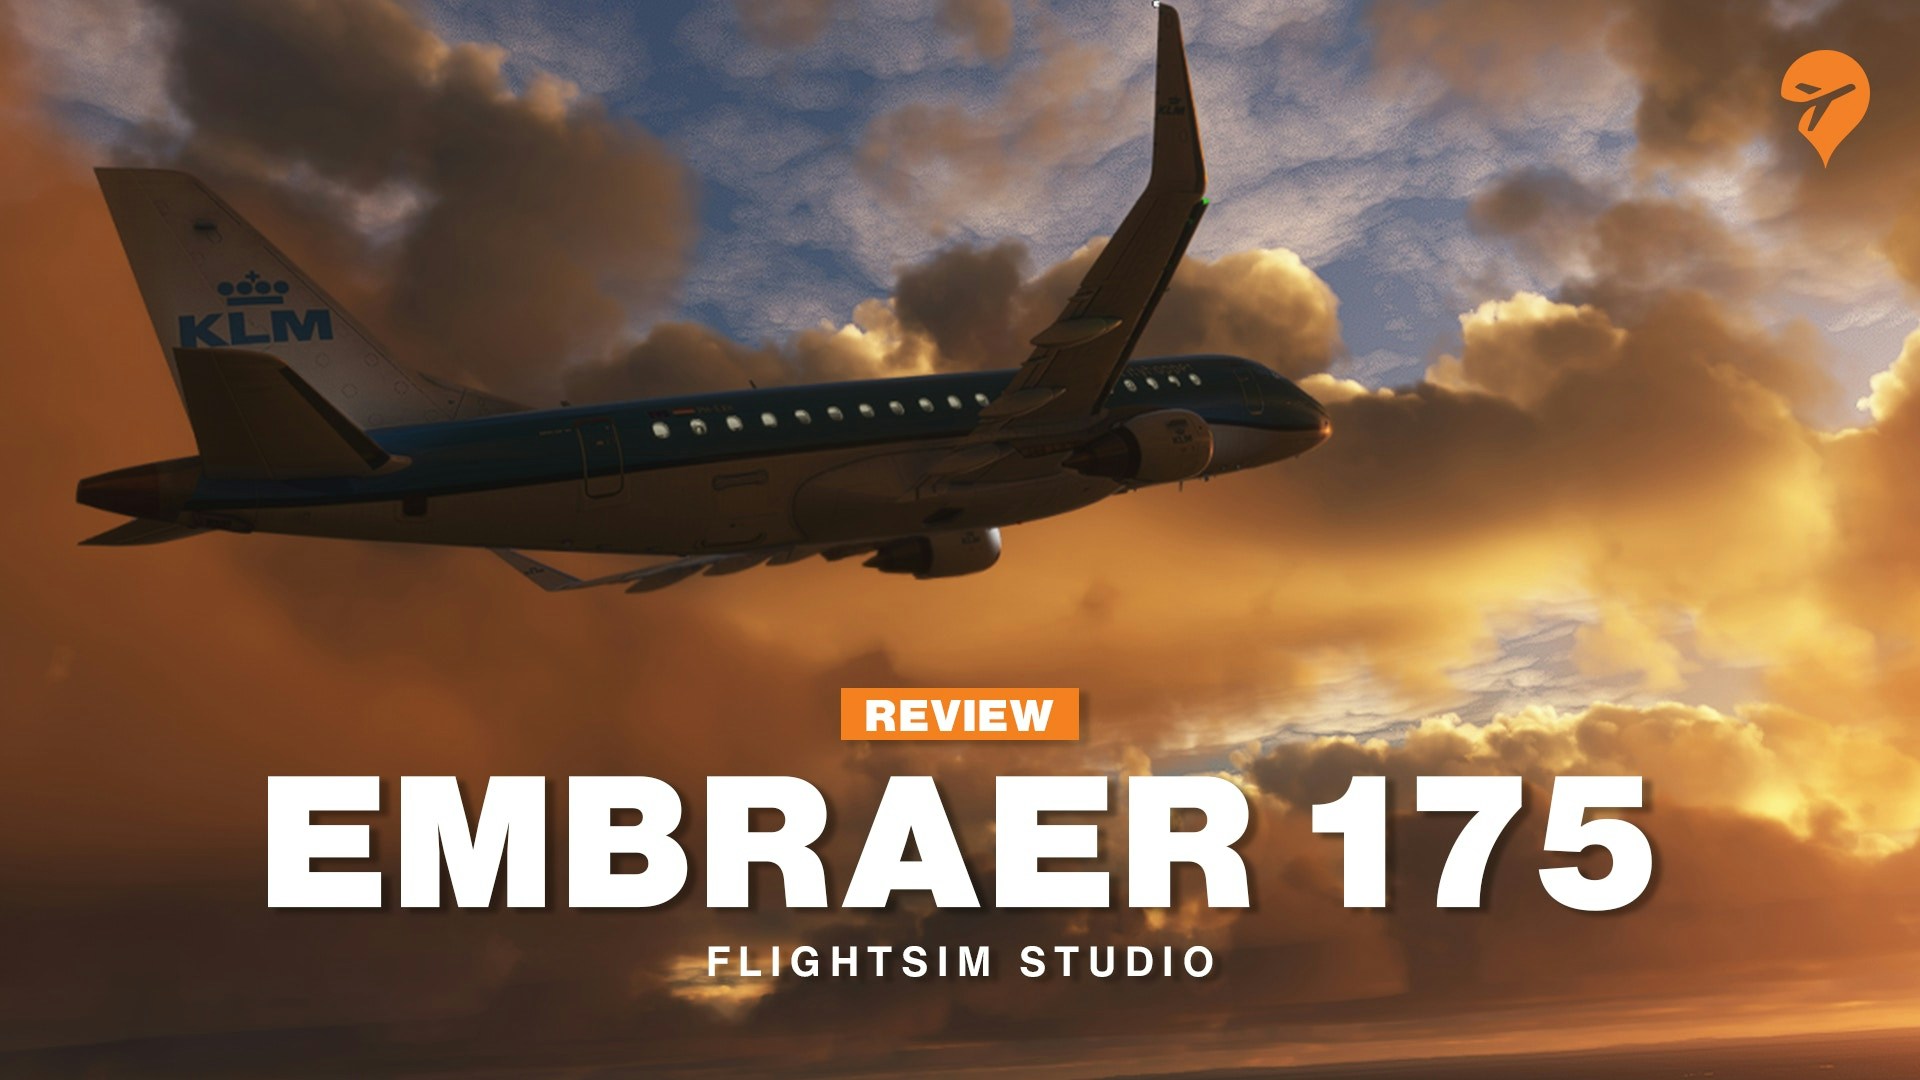 Microsoft Flight Simulator Is Now Available For Digital Pre-order